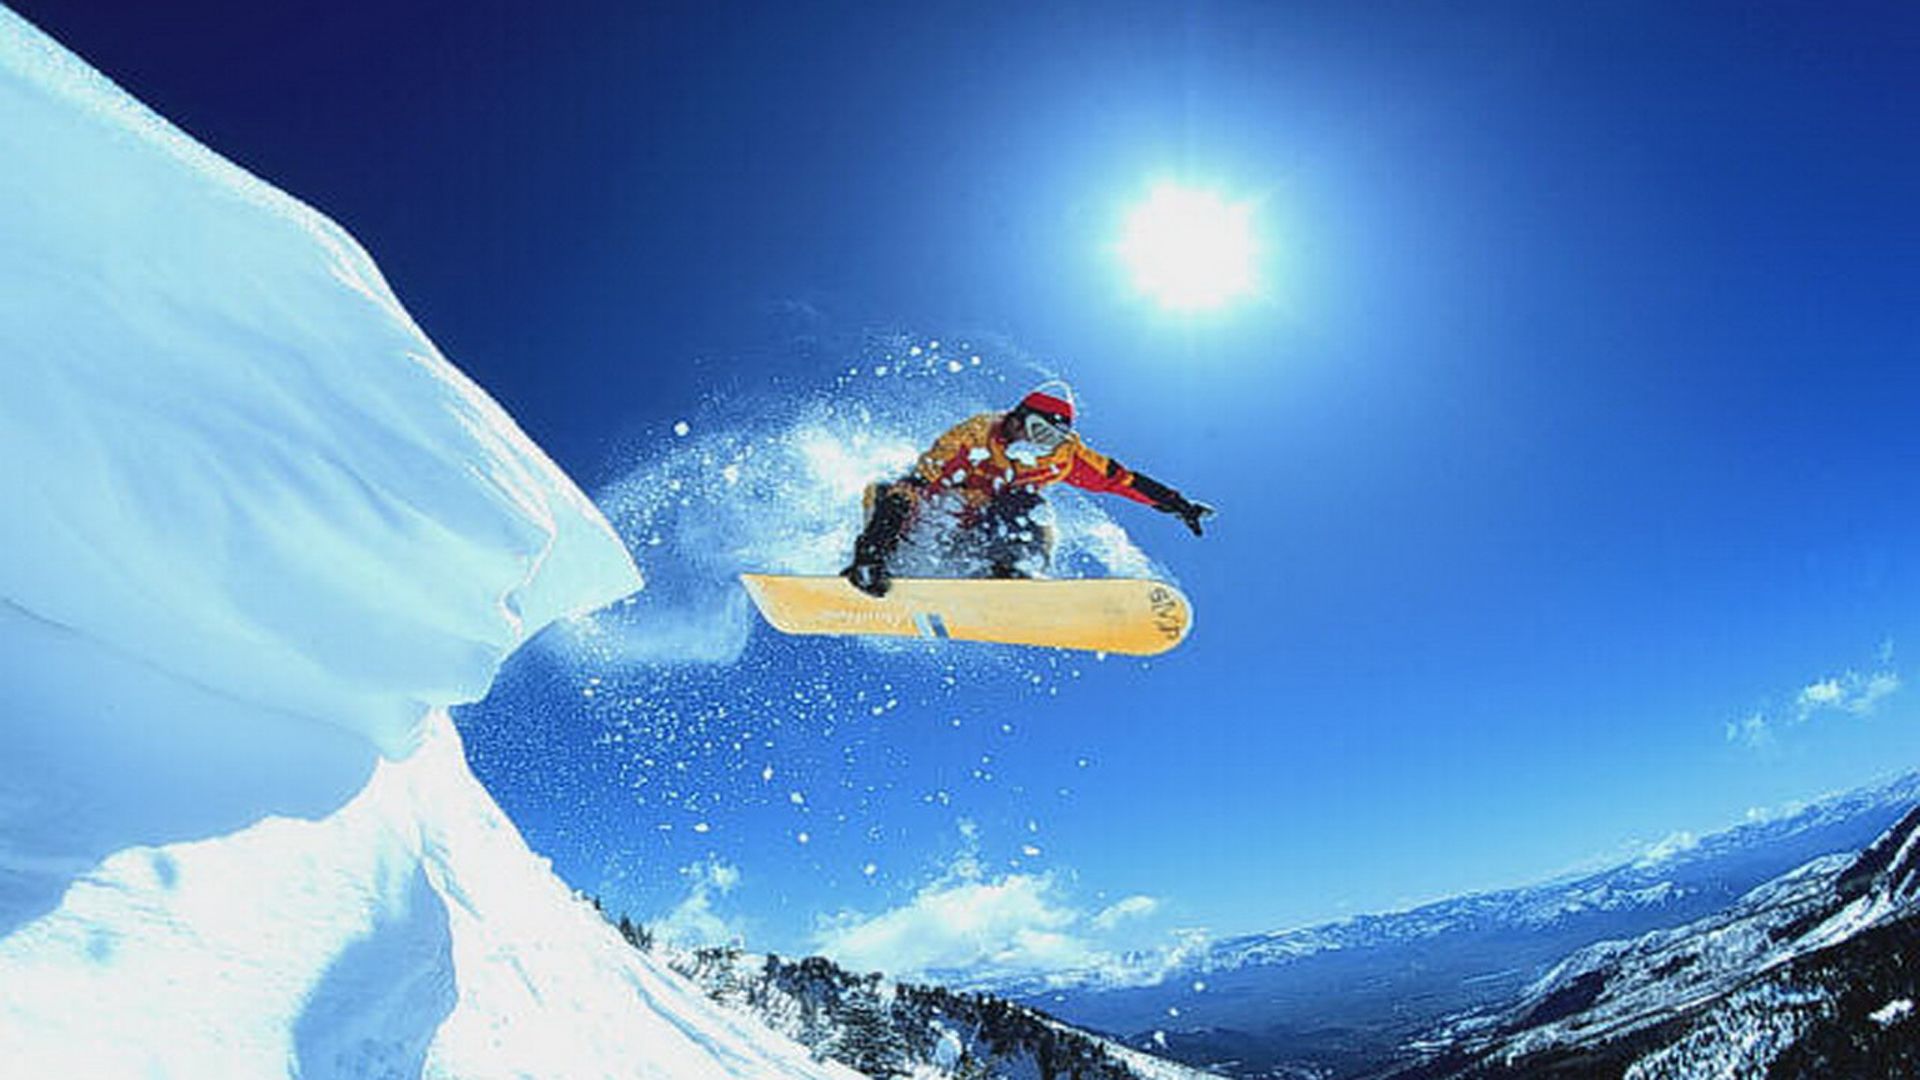 Amazing Snowboarder Jump Wallpaper, http://wallpapers.ae/amazing ...